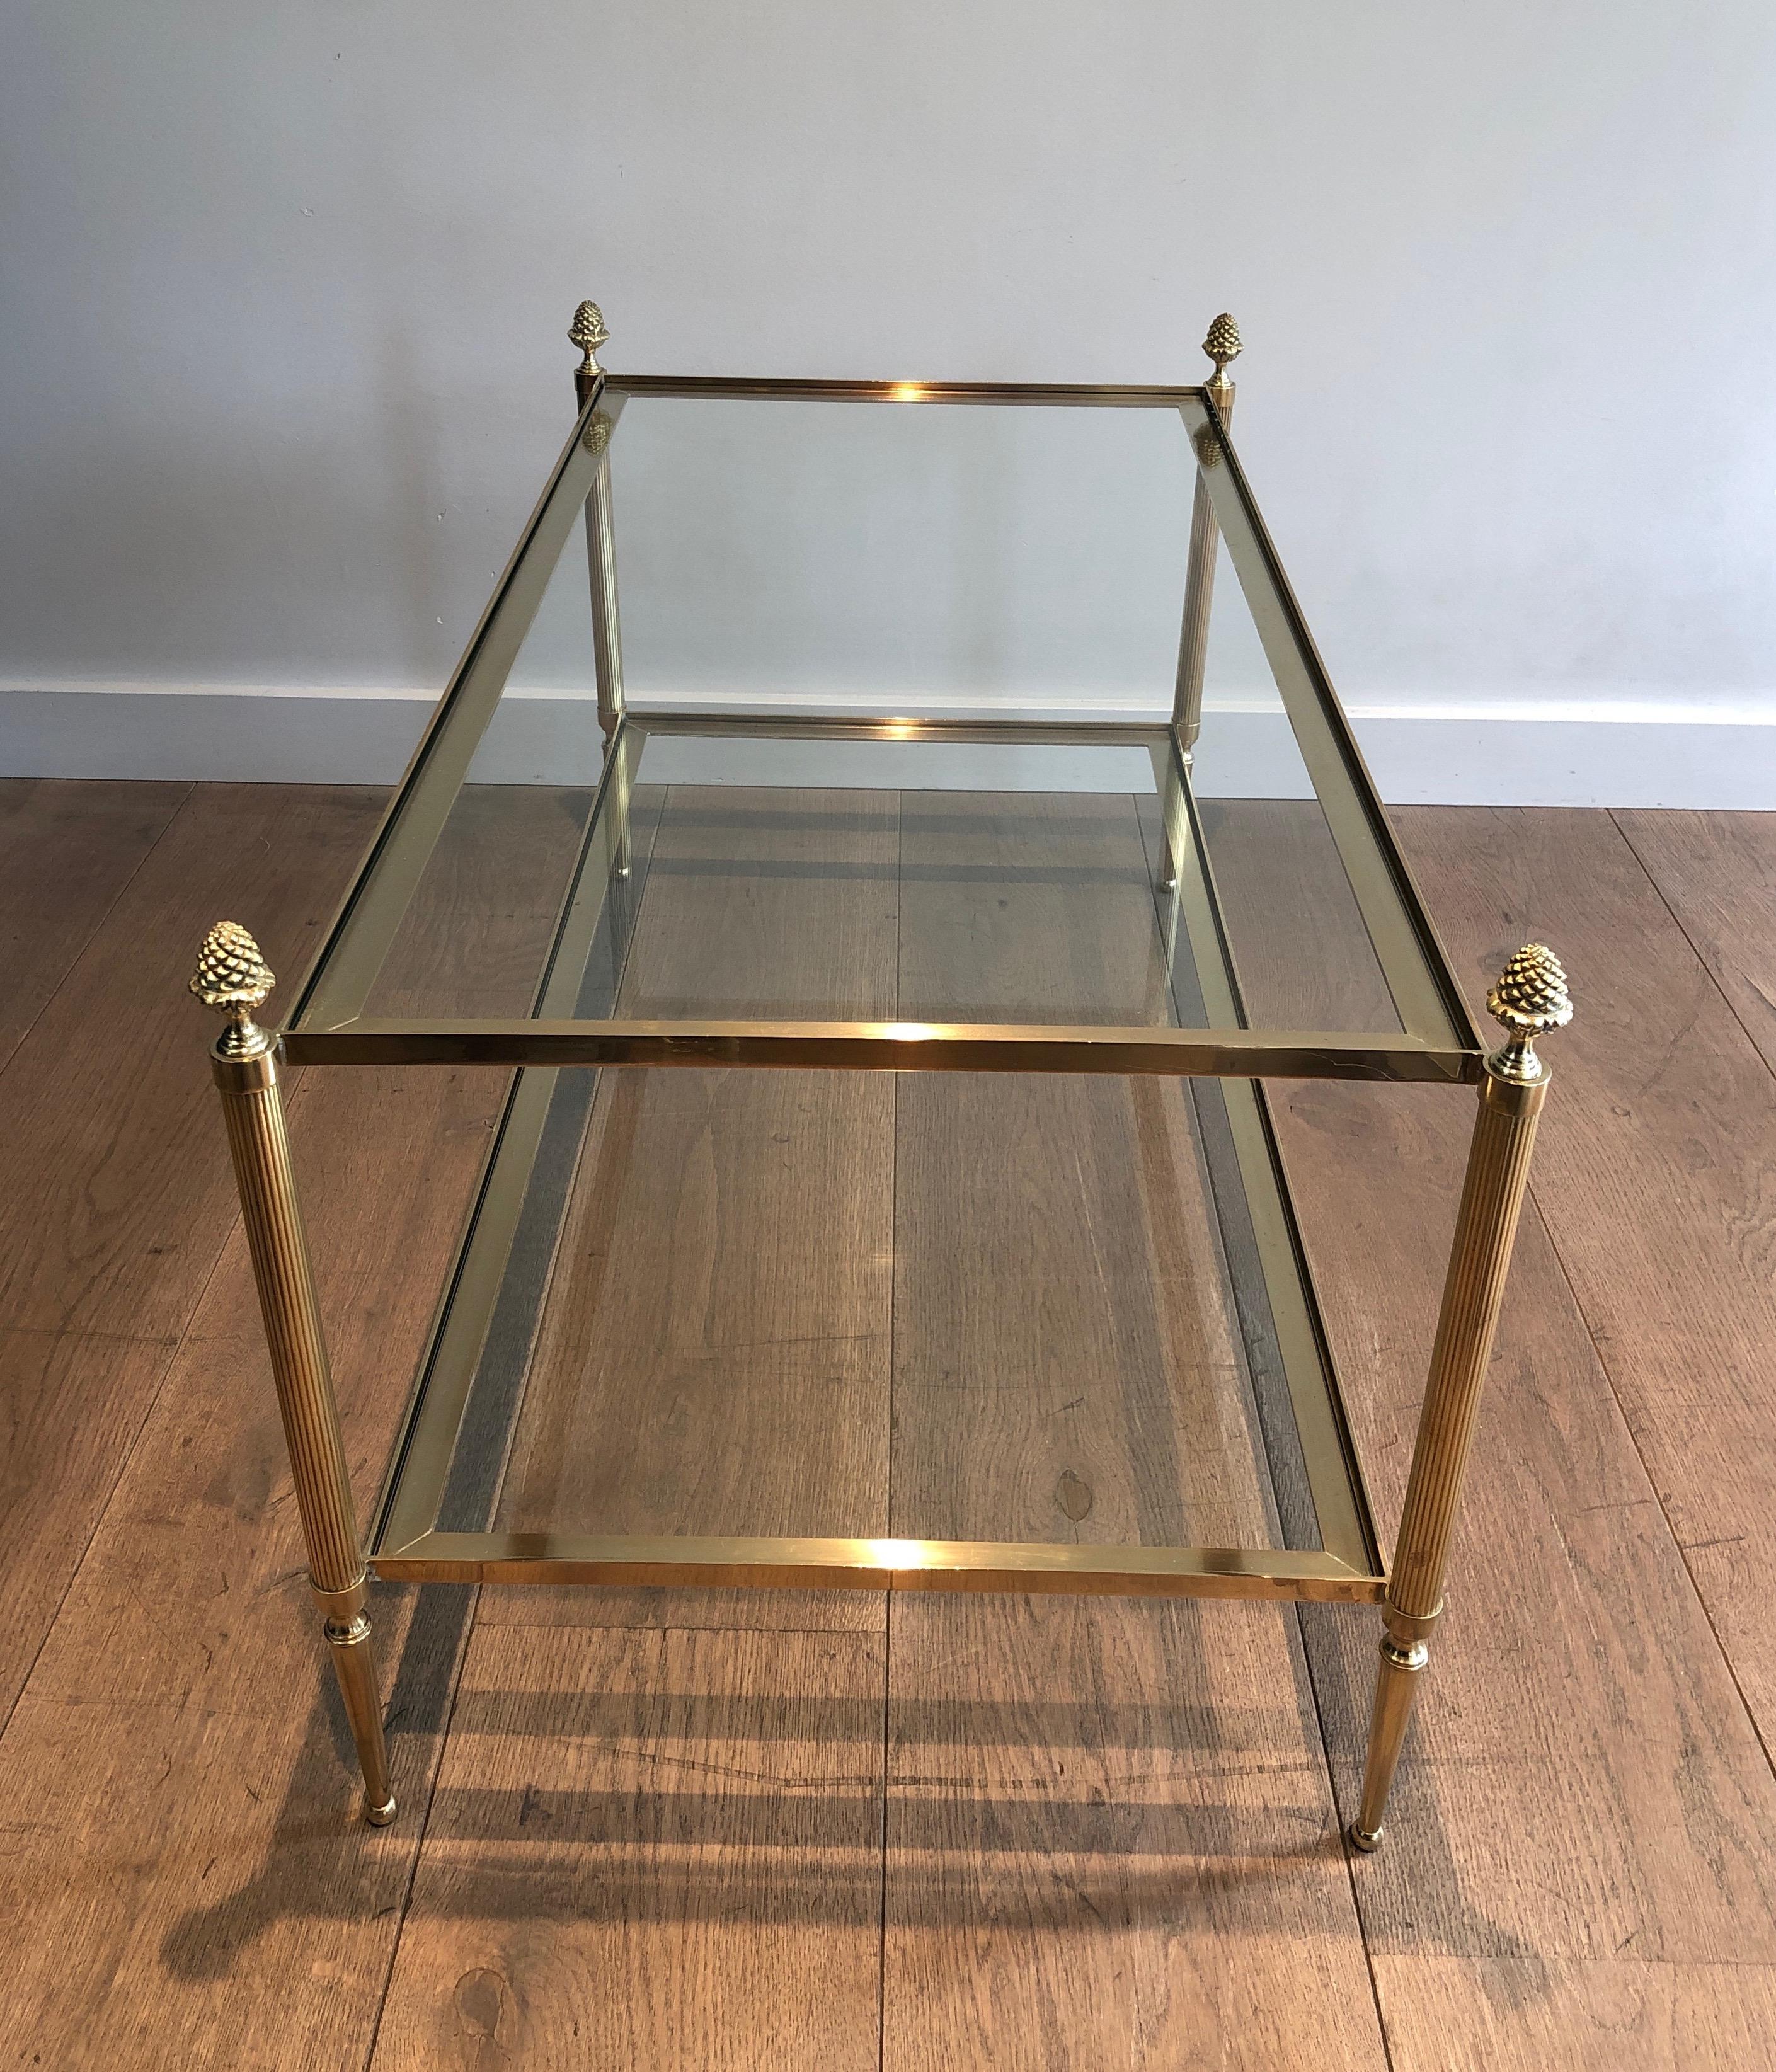 Mid-20th Century Neoclassical Style Maison Baguès Two Tiers Brass Coffee Table. Circa 1940